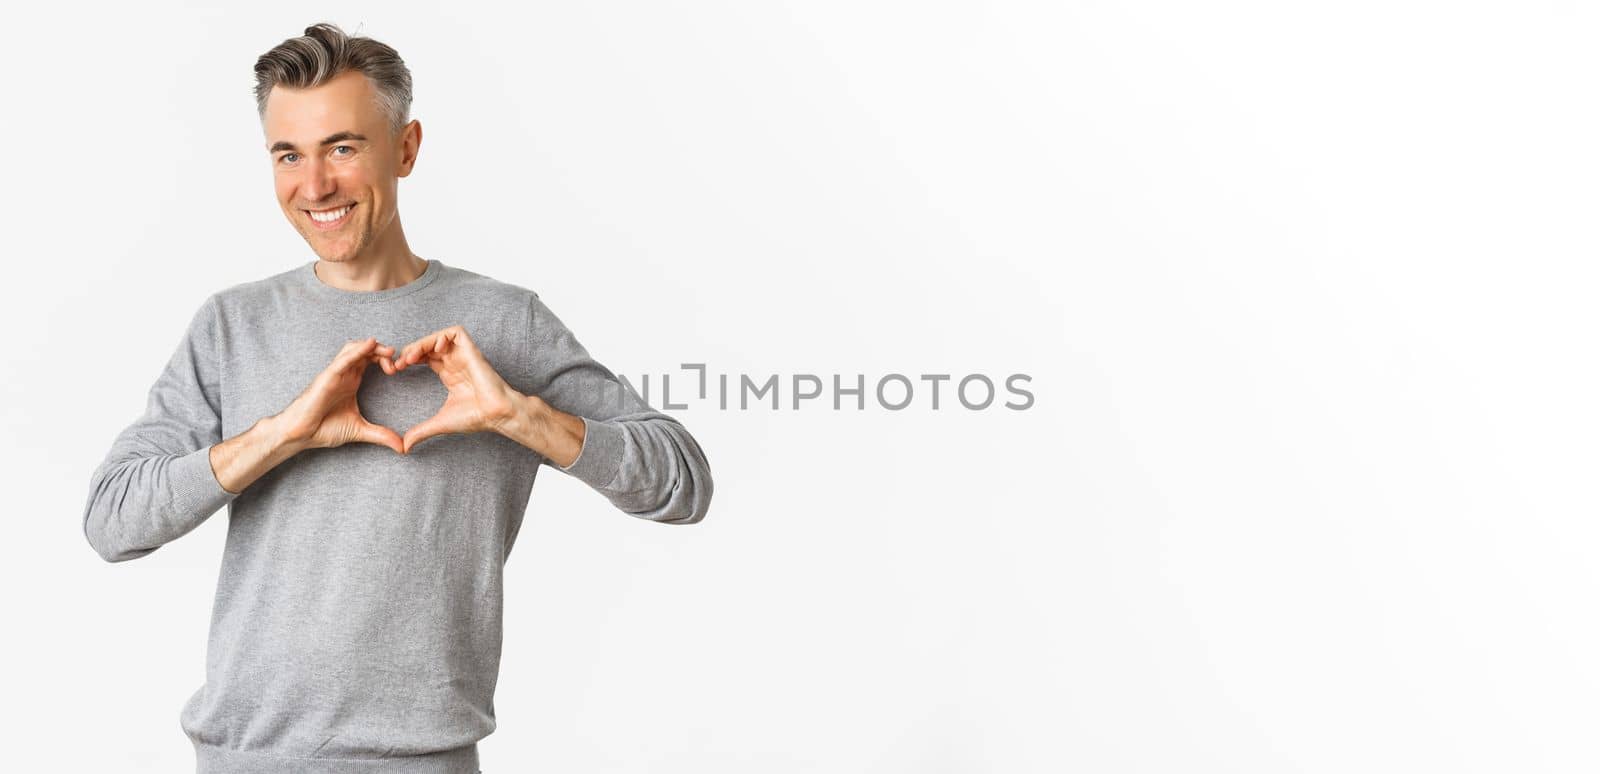 Portrait of cheeky middle-aged man in grey sweater, smiling and showing heart sign, love someone, standing over white background.